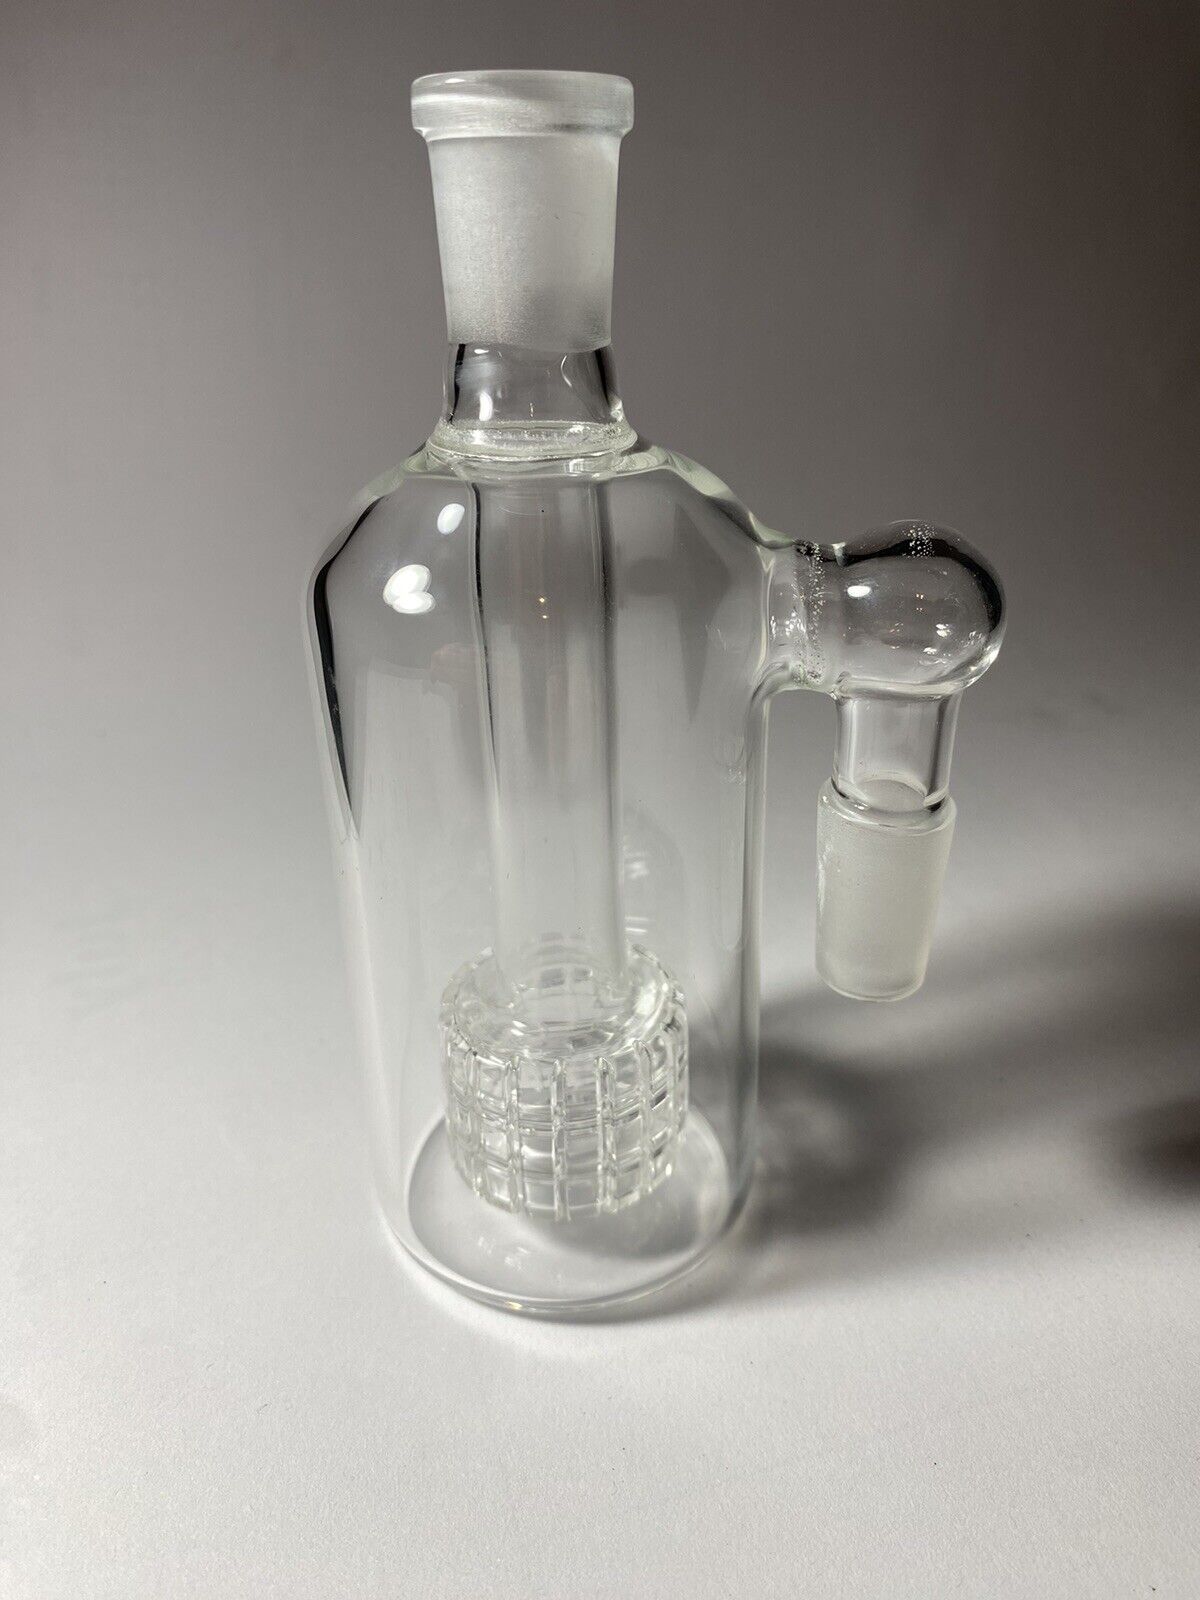 BEST PERC 14mm Ash Catcher with CAGE percolator 90 Degree Stem NEW